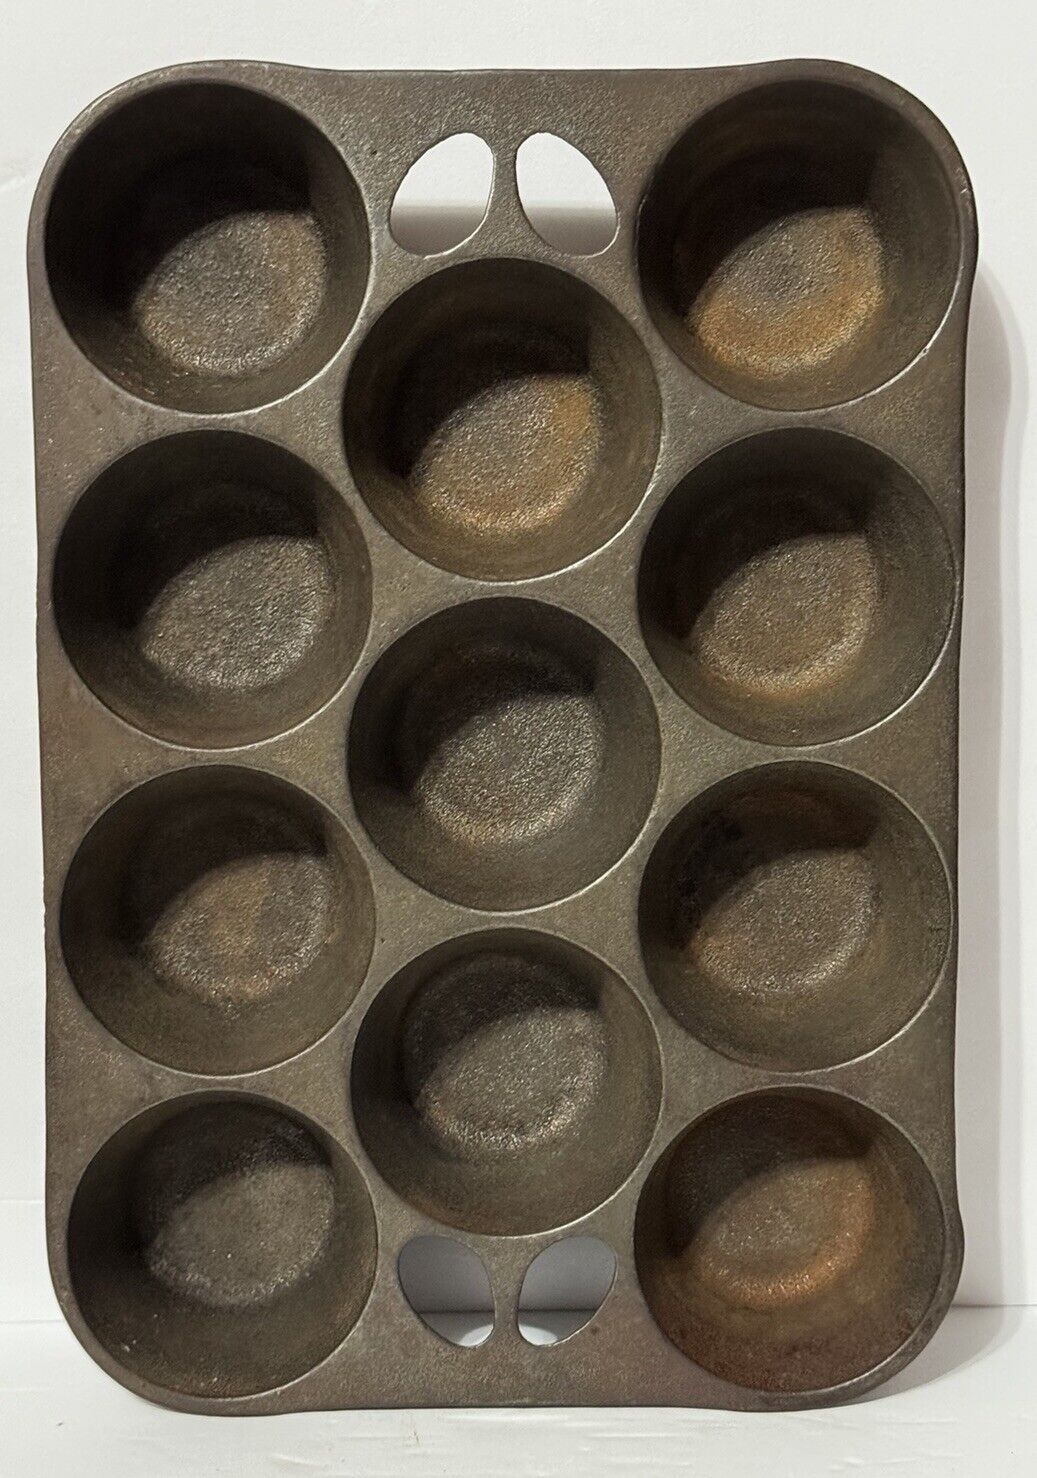 Griswold Wagner Ware Muffin Pan Cast Iron Pop Over 11 Cup USA Made B